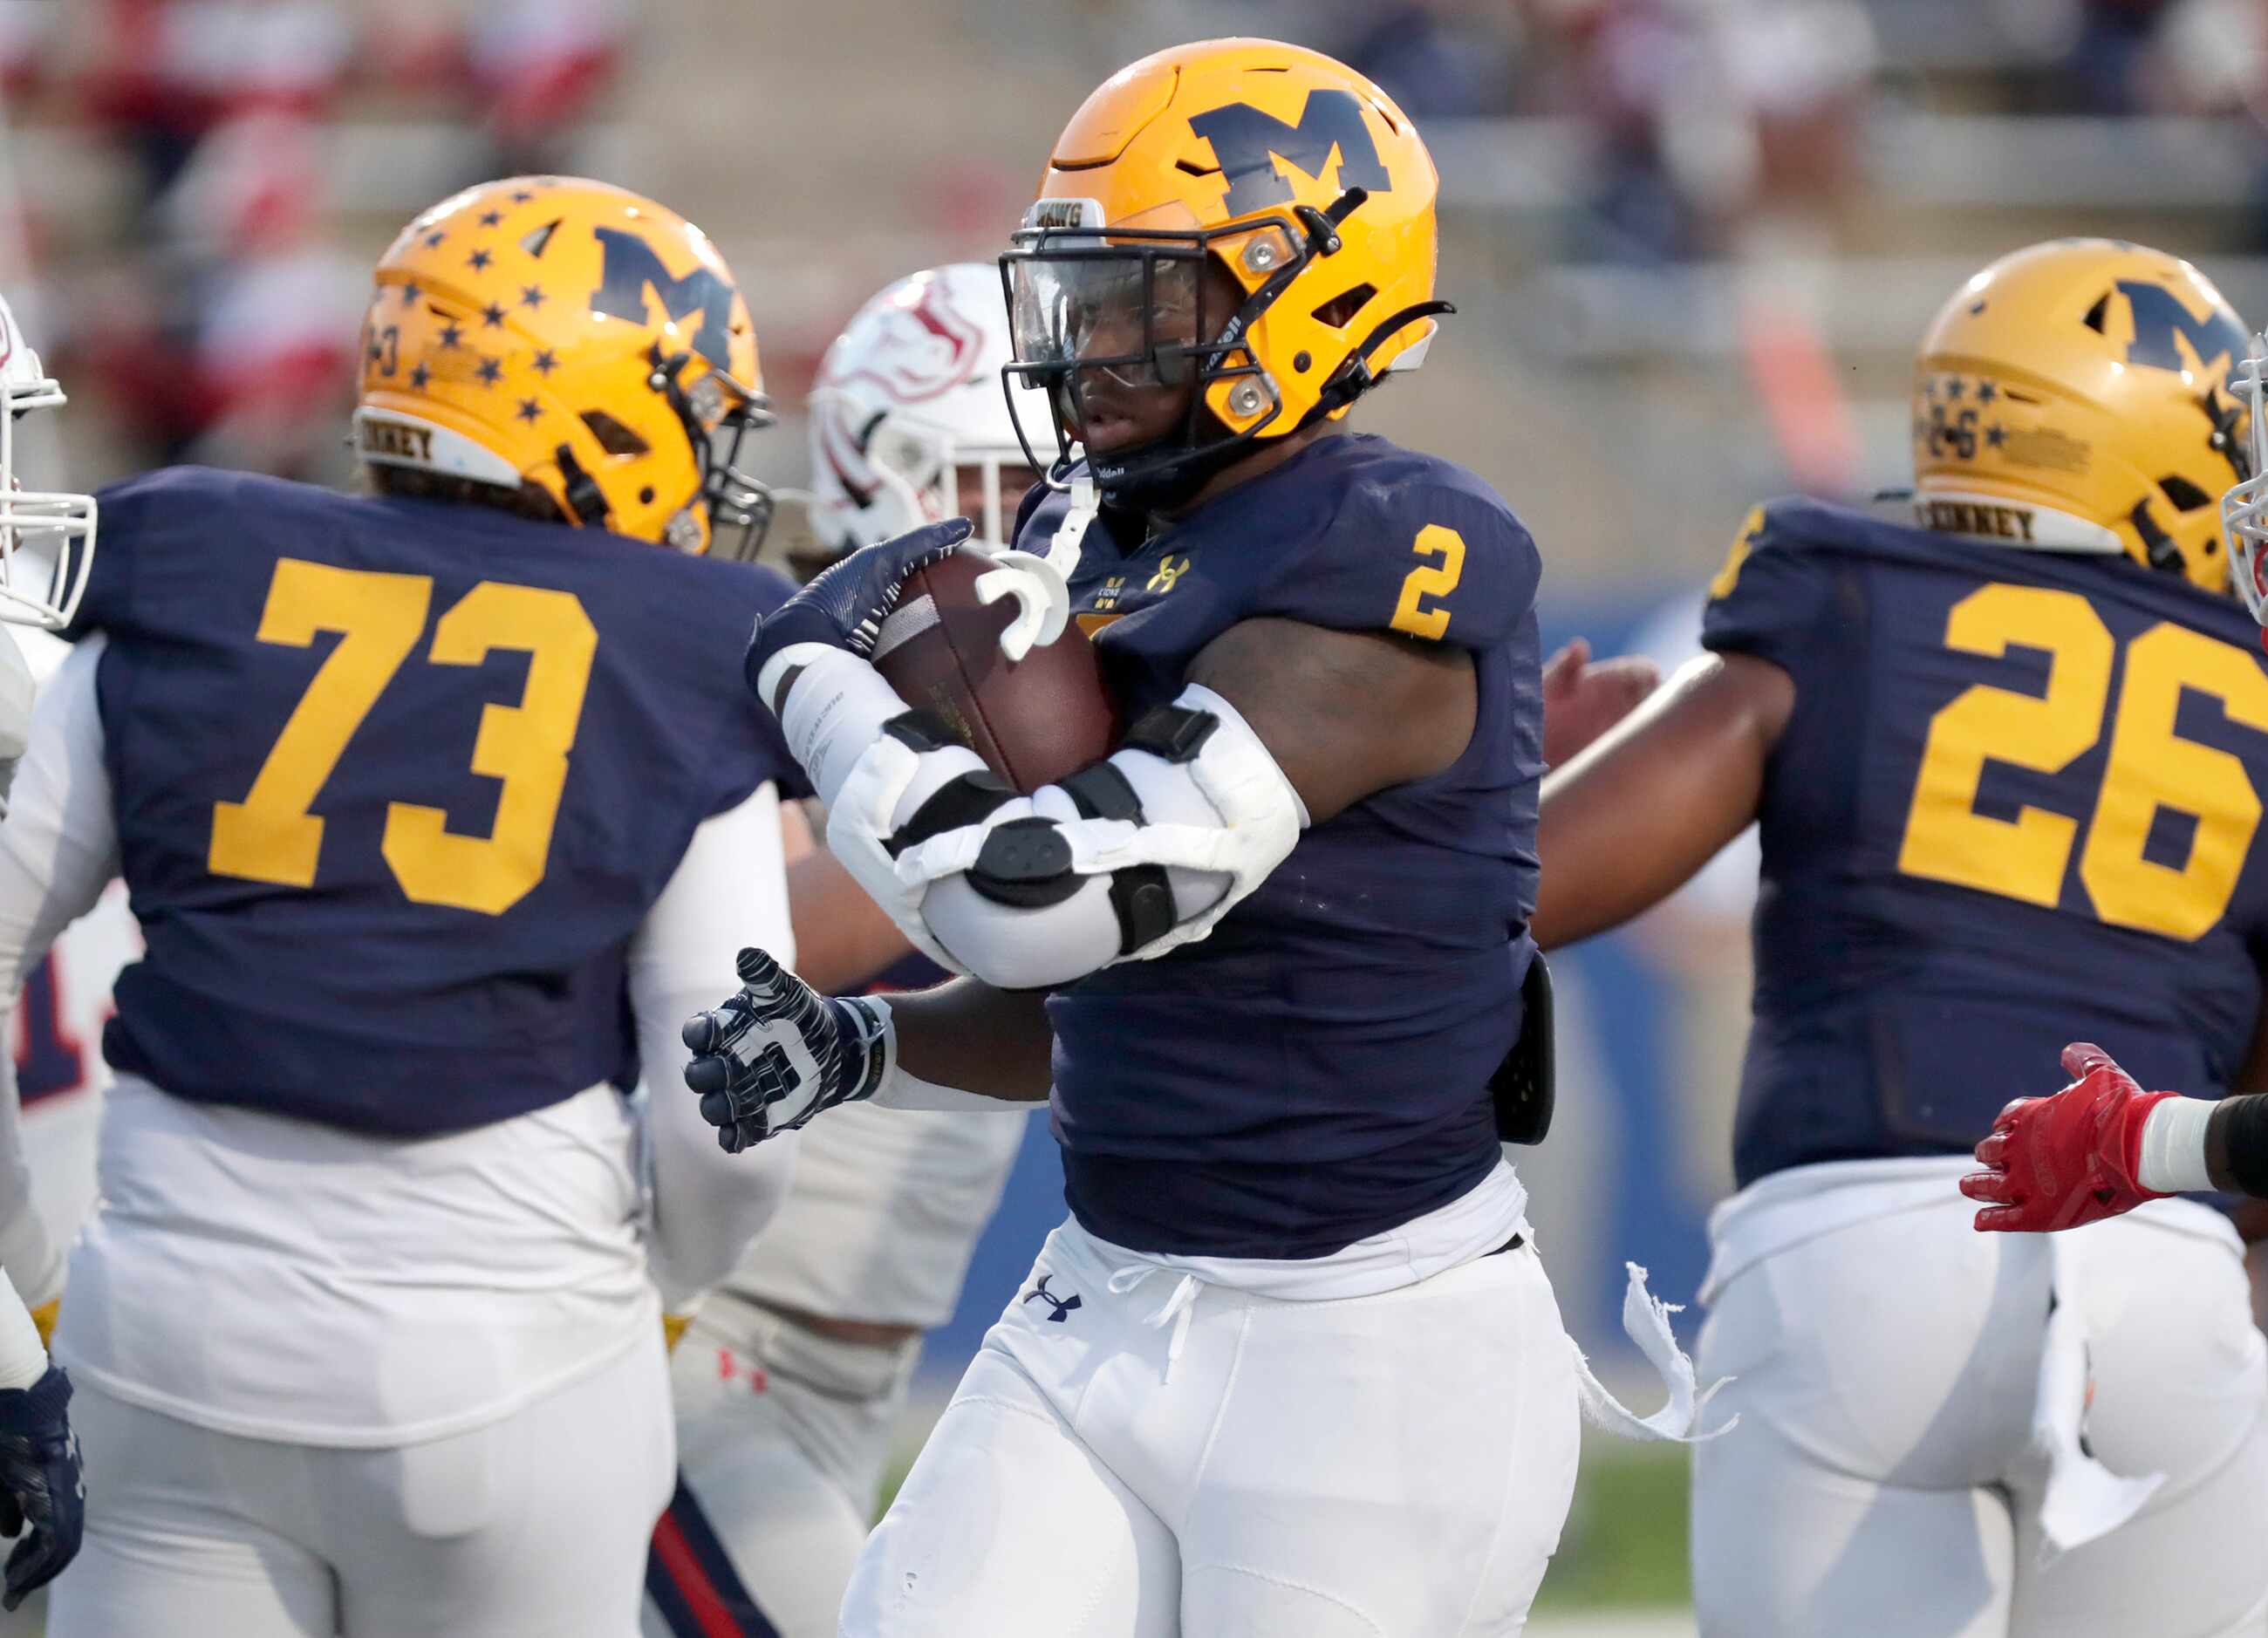 McKinney High School running back Bryan Jackson (2) goes untouched into the end zone for the...